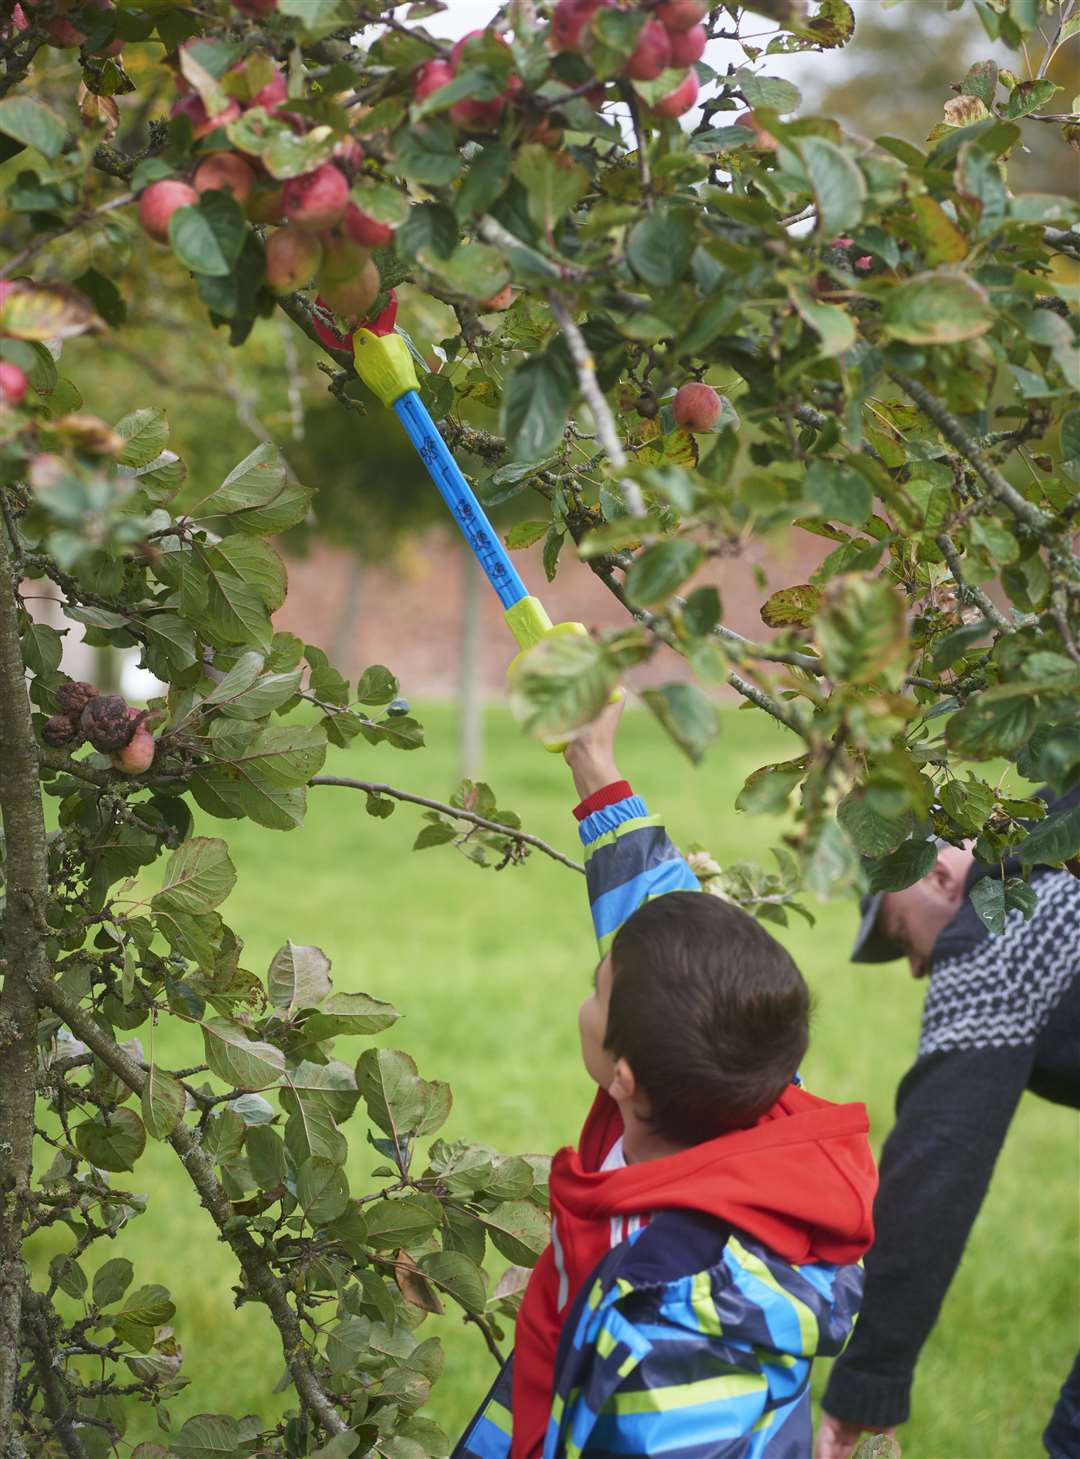 Picking apples in the orchard on Apple Day